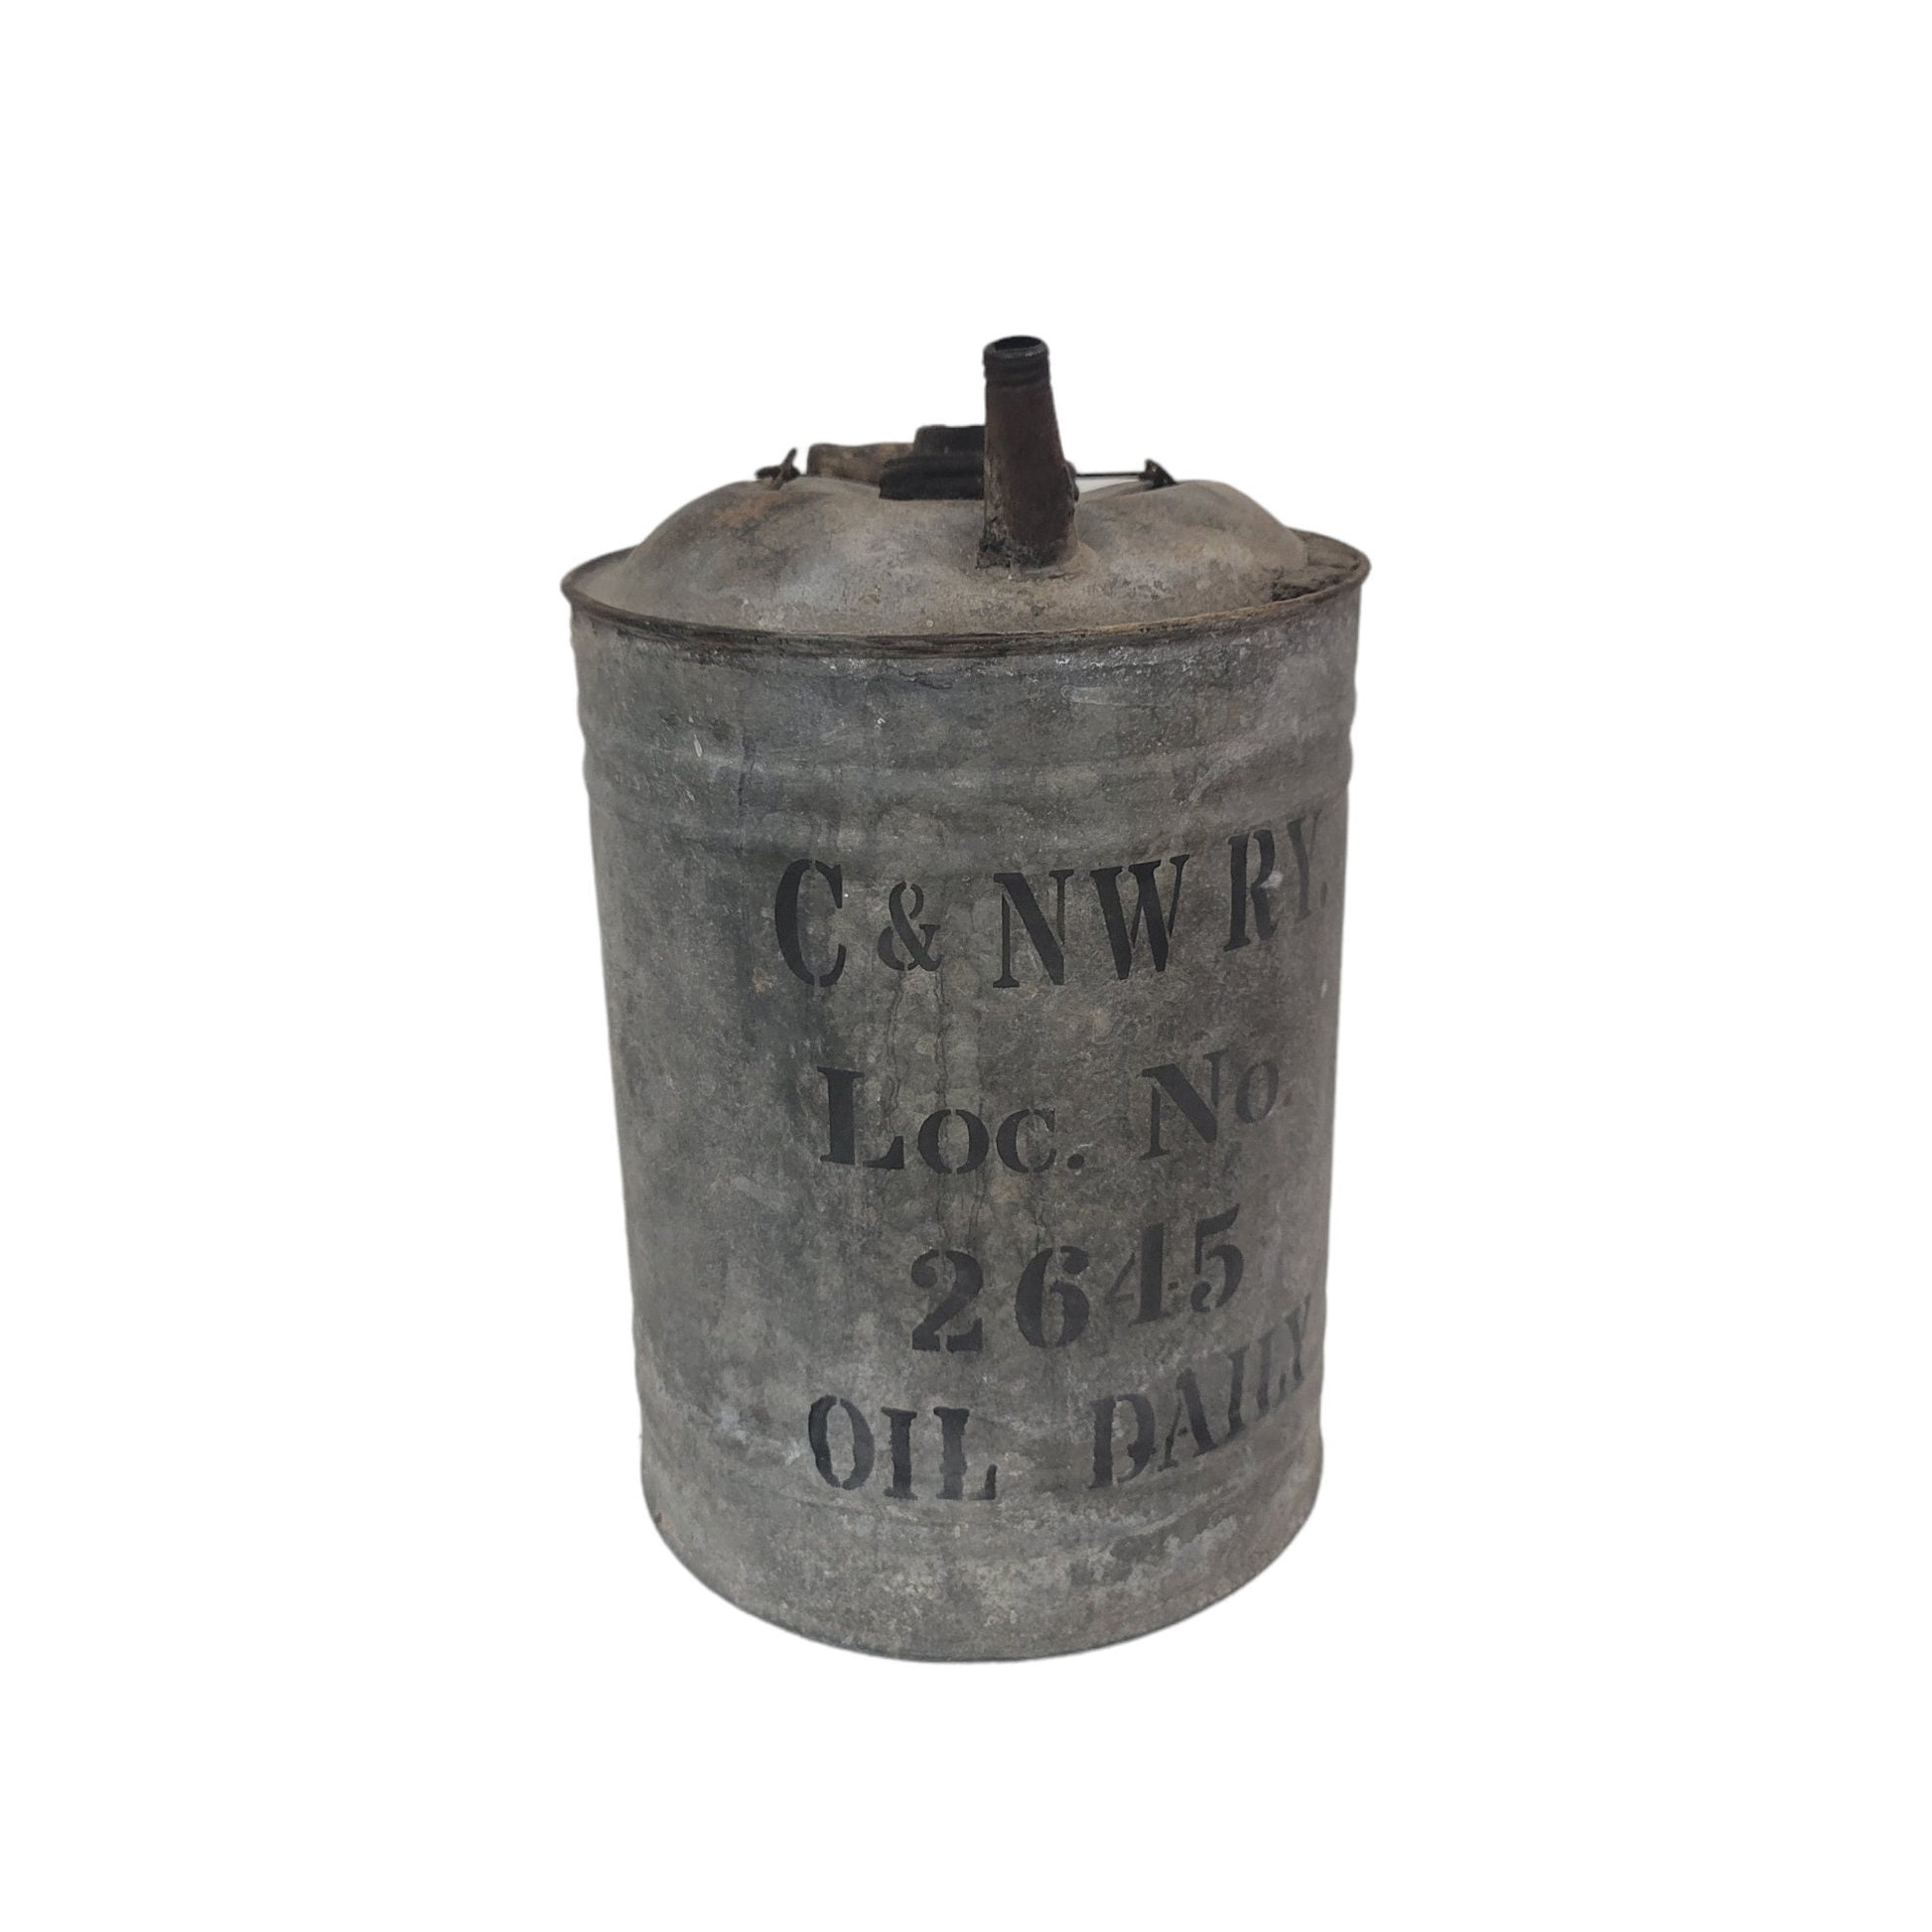 Chicago & North Western Railway Oil Can